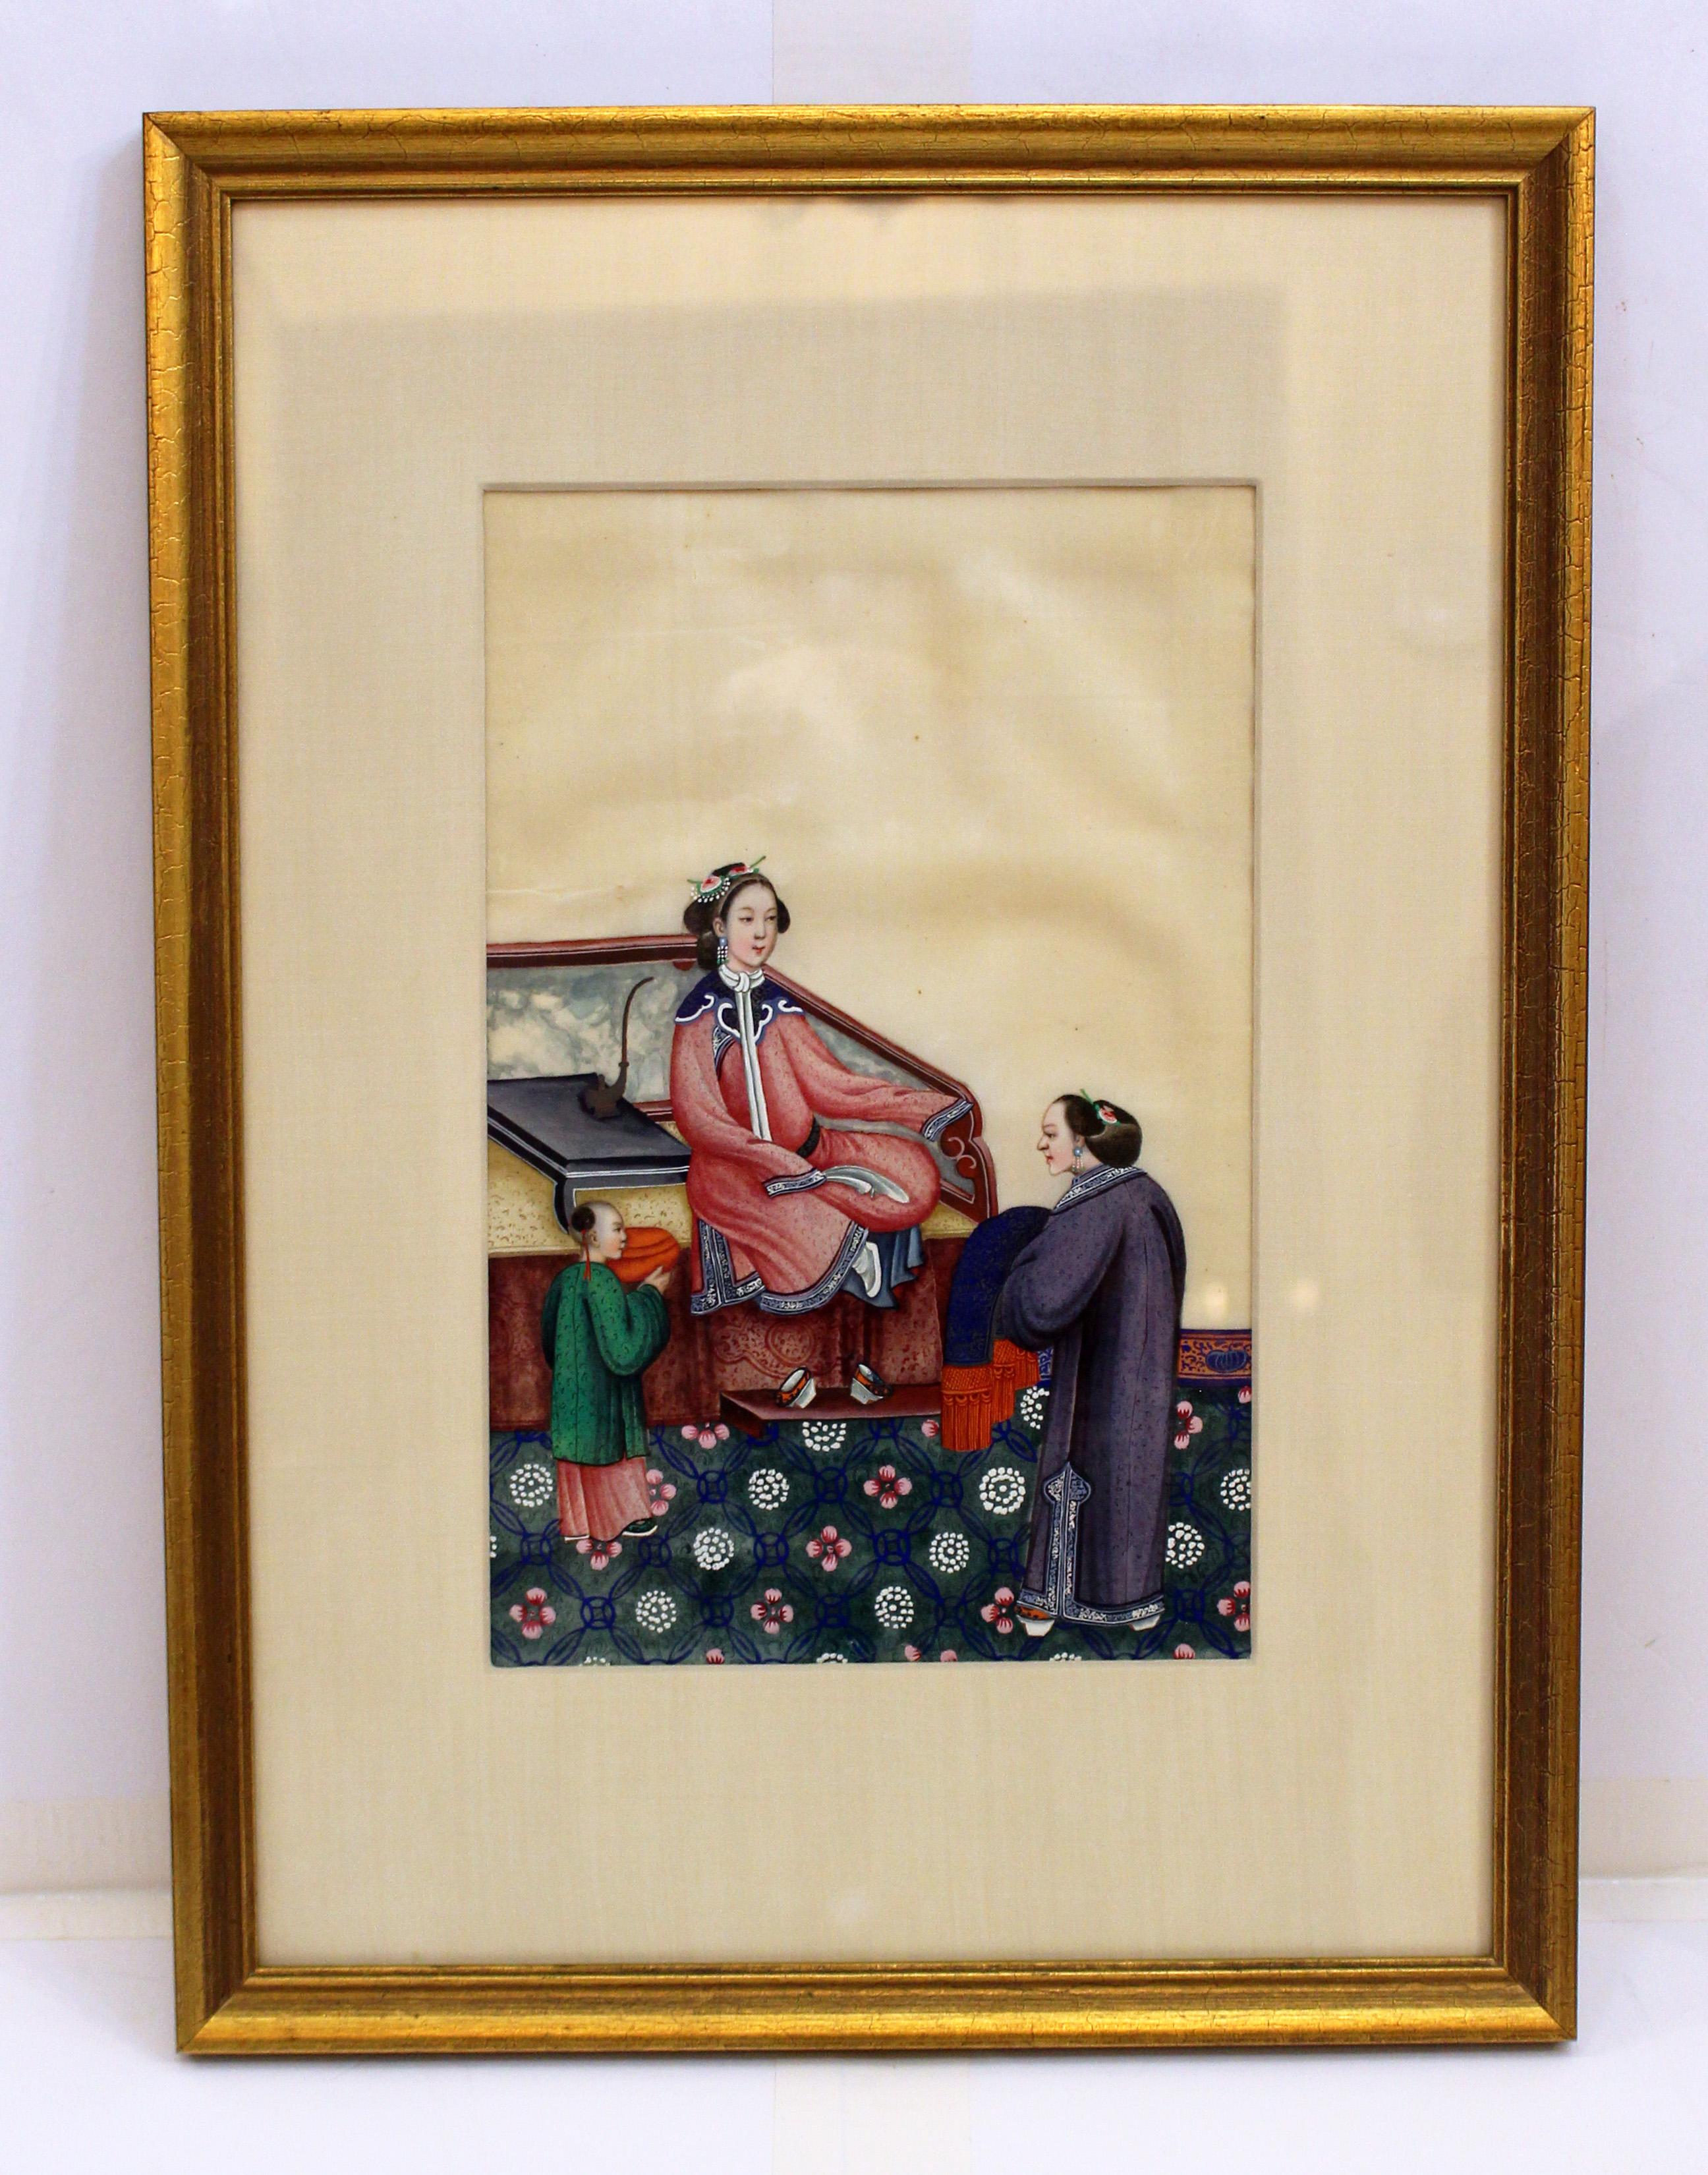 Mid-19th century Chinese portrait of a lady painted on rice or pith paper. Qing dynasty. Gouache watercolors creating a rich tapestry of colors of this lady at ease. Note how 3-dimensional things become. Her shoes are off, a cushion & throw are